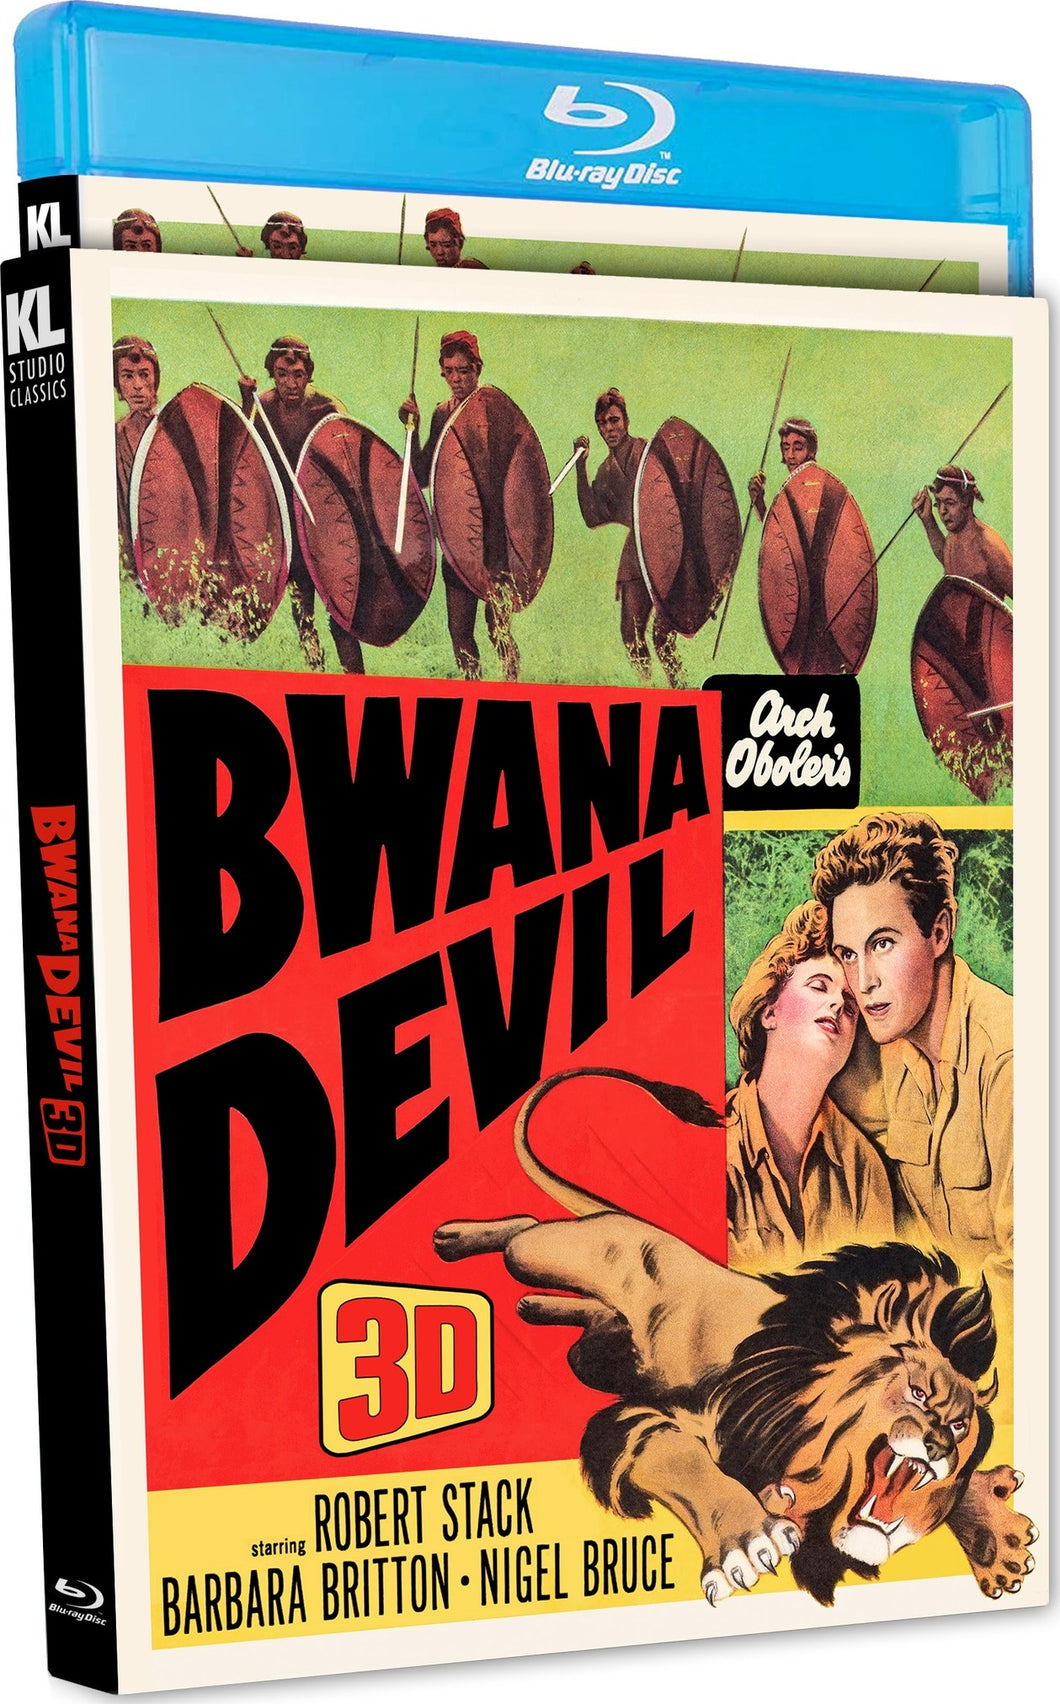 Bwana Devil 3D - front cover